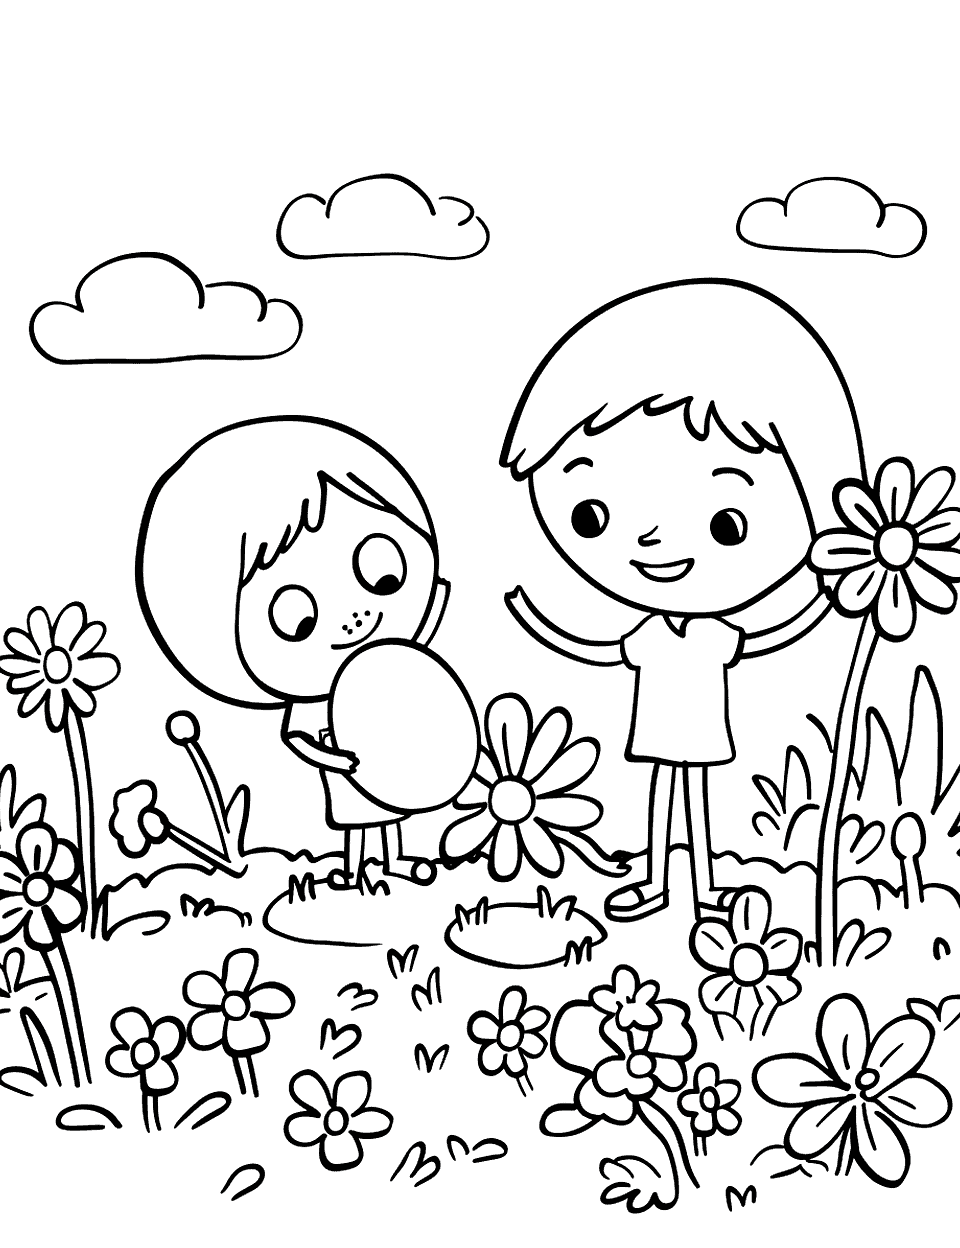 Oval Egg Hunt Shapes Coloring Page - A garden scene with children searching for oval-shaped eggs hidden among flowers.